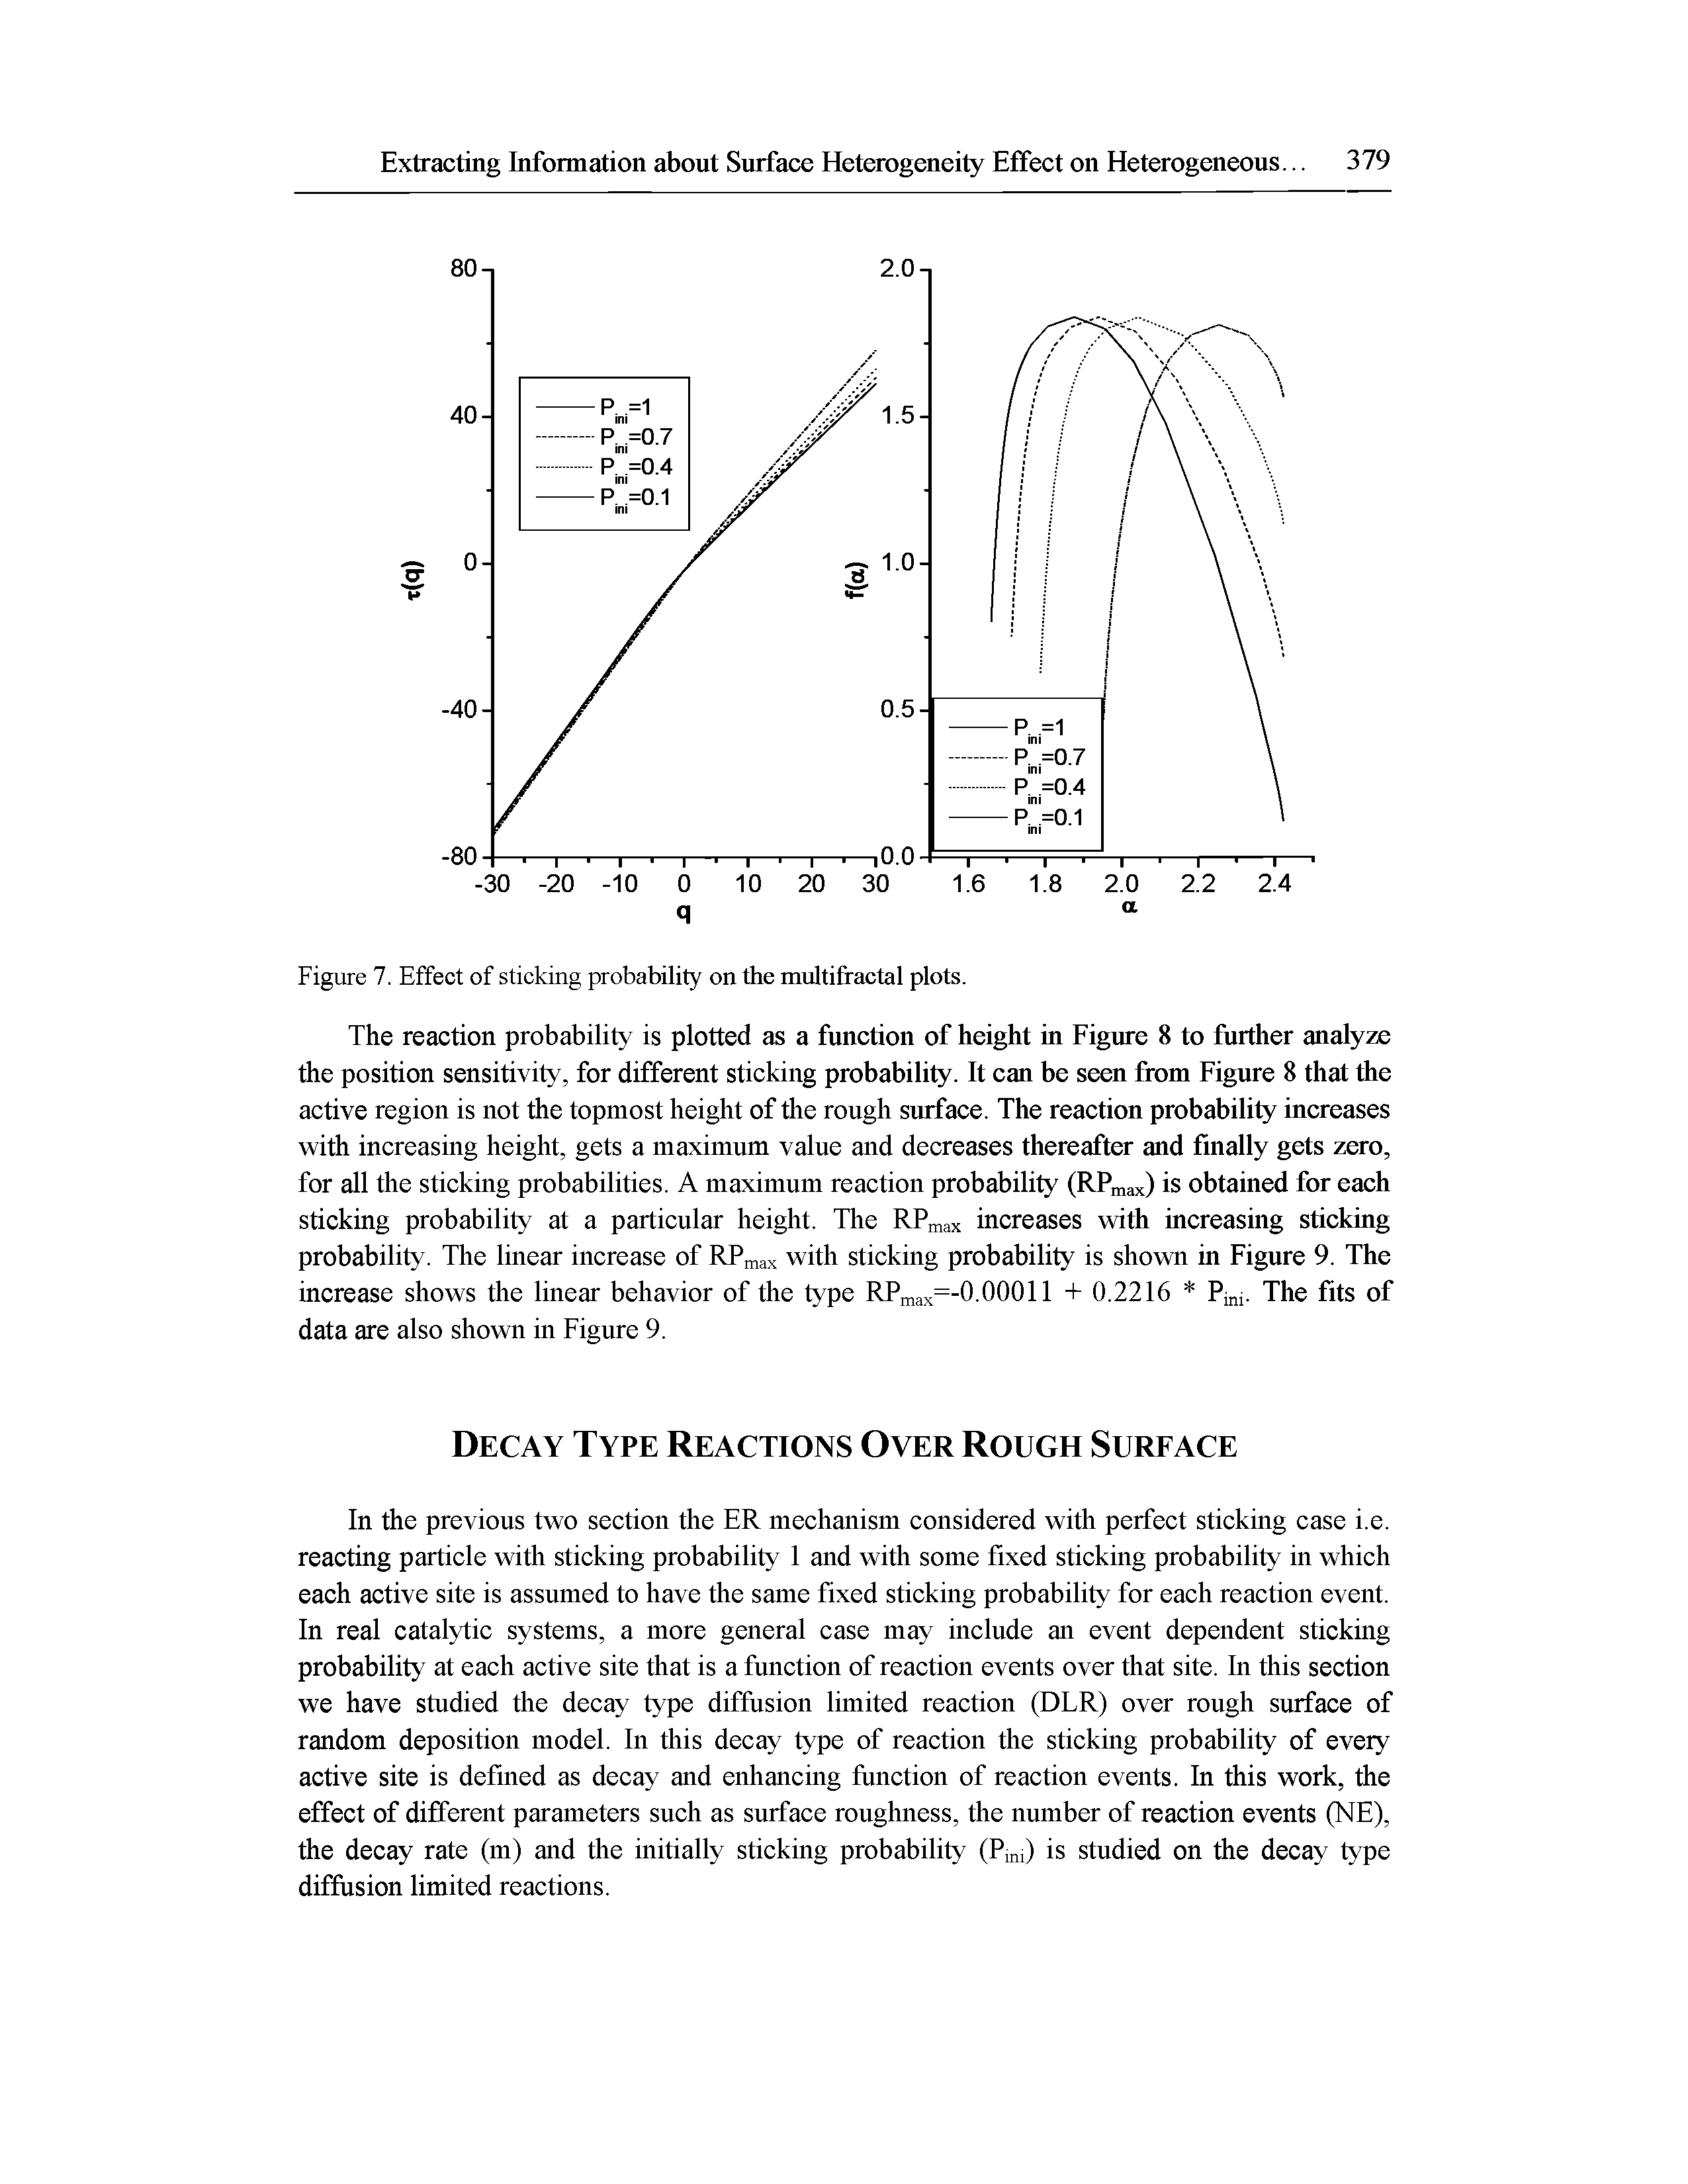 Figure 7. Effect of sticking probability on the multifractal plots.